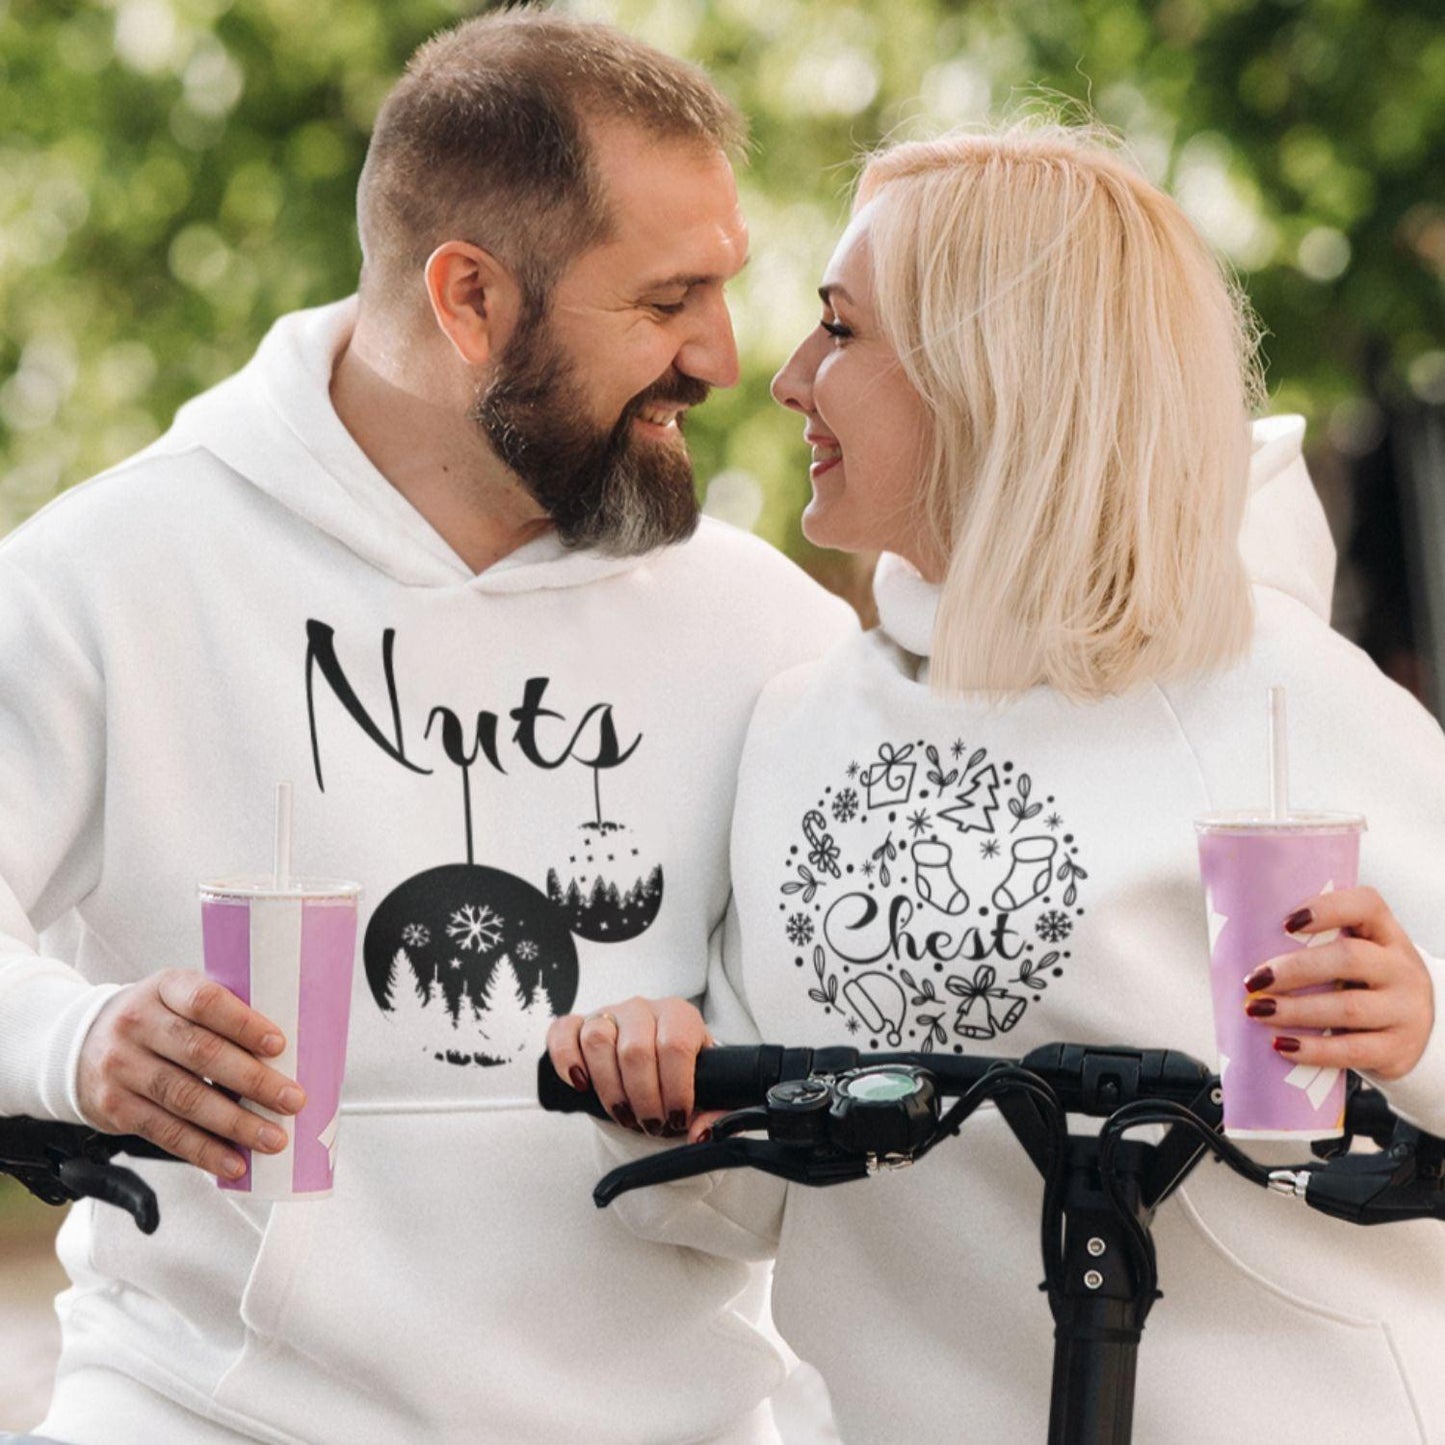 Adorable Nut & Chest Matching Outfits - Ideal Couple's Christmas Gift Set! - 4Lovebirds